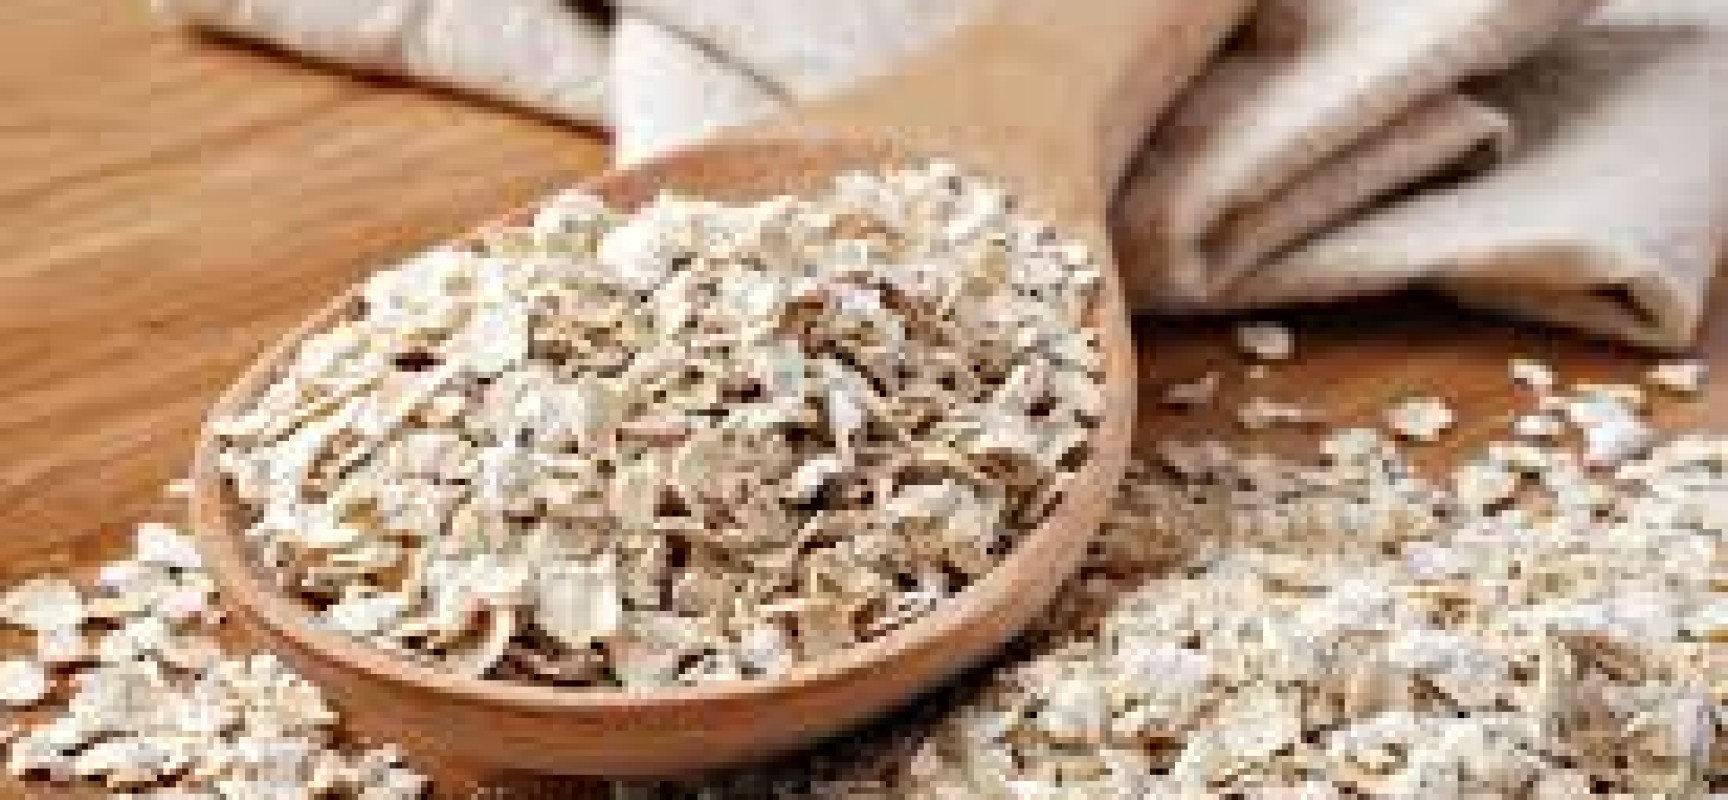 The Super Food Meal – Oat Meal